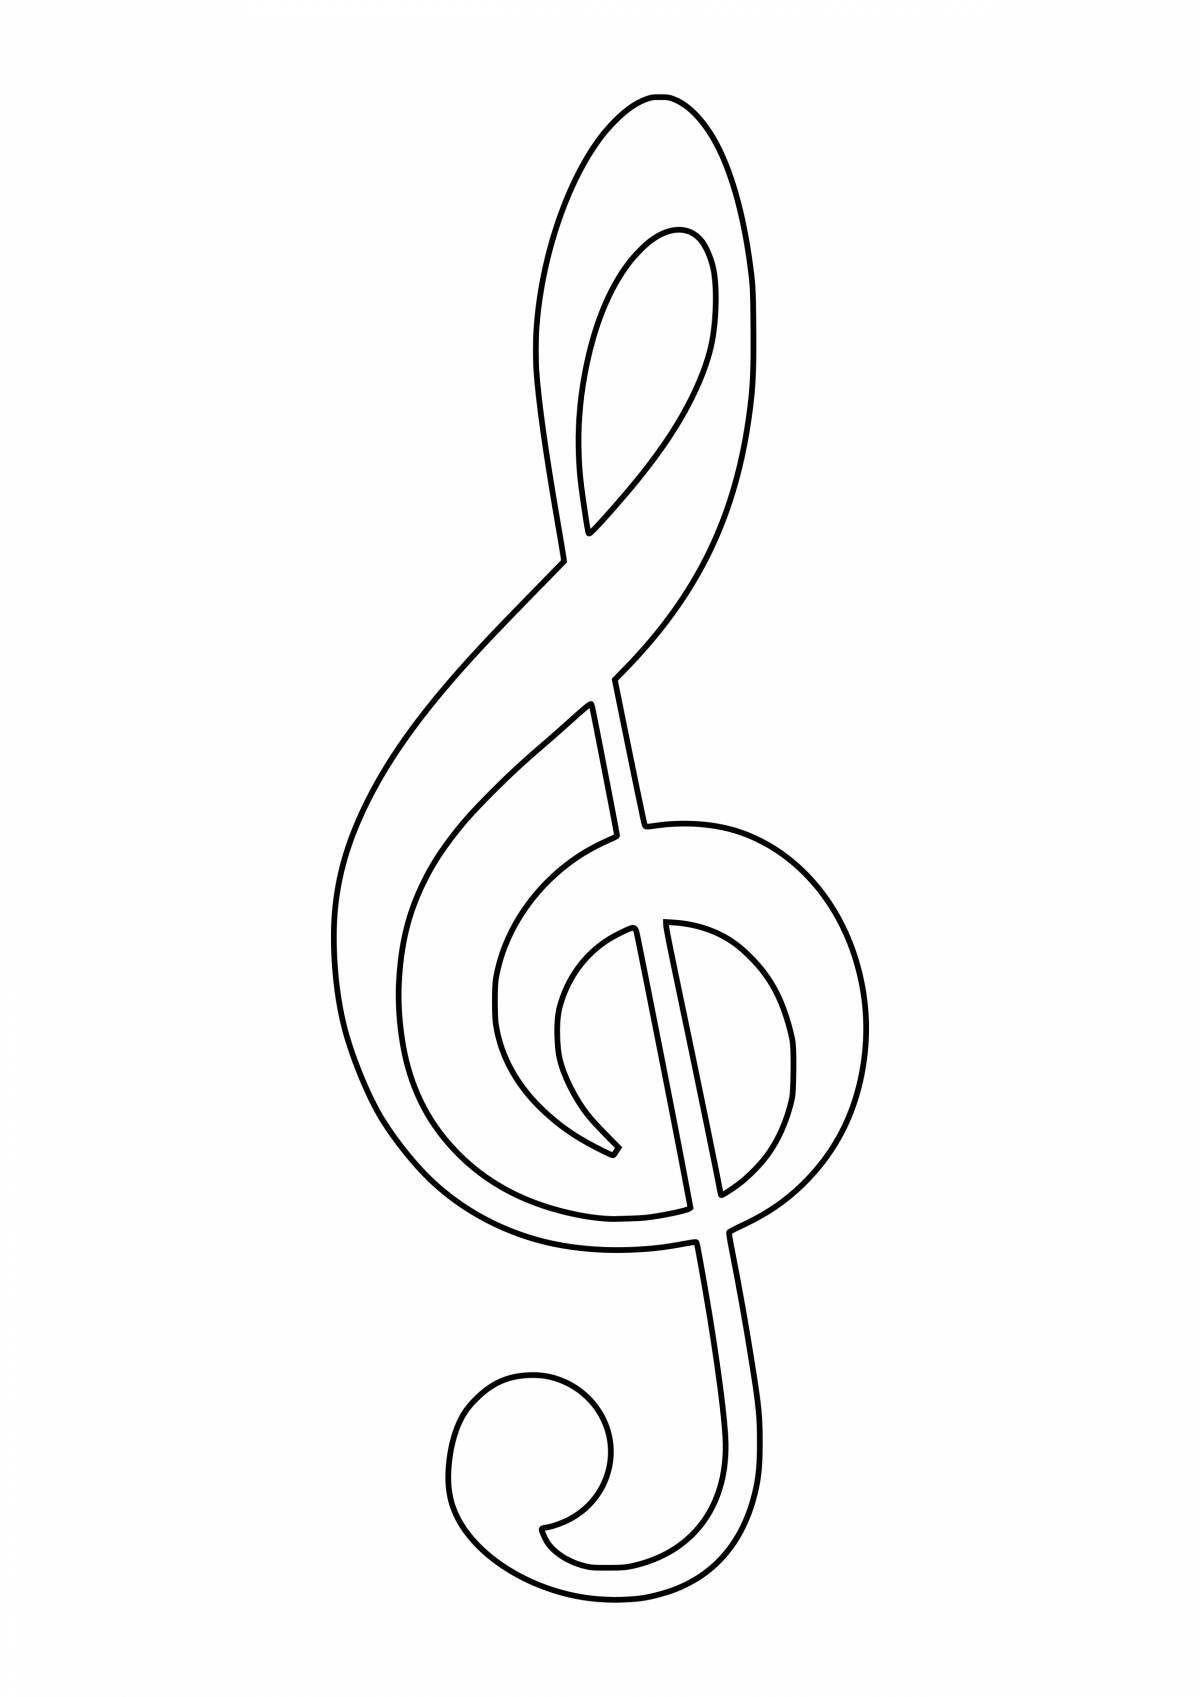 Playful treble clef for kids